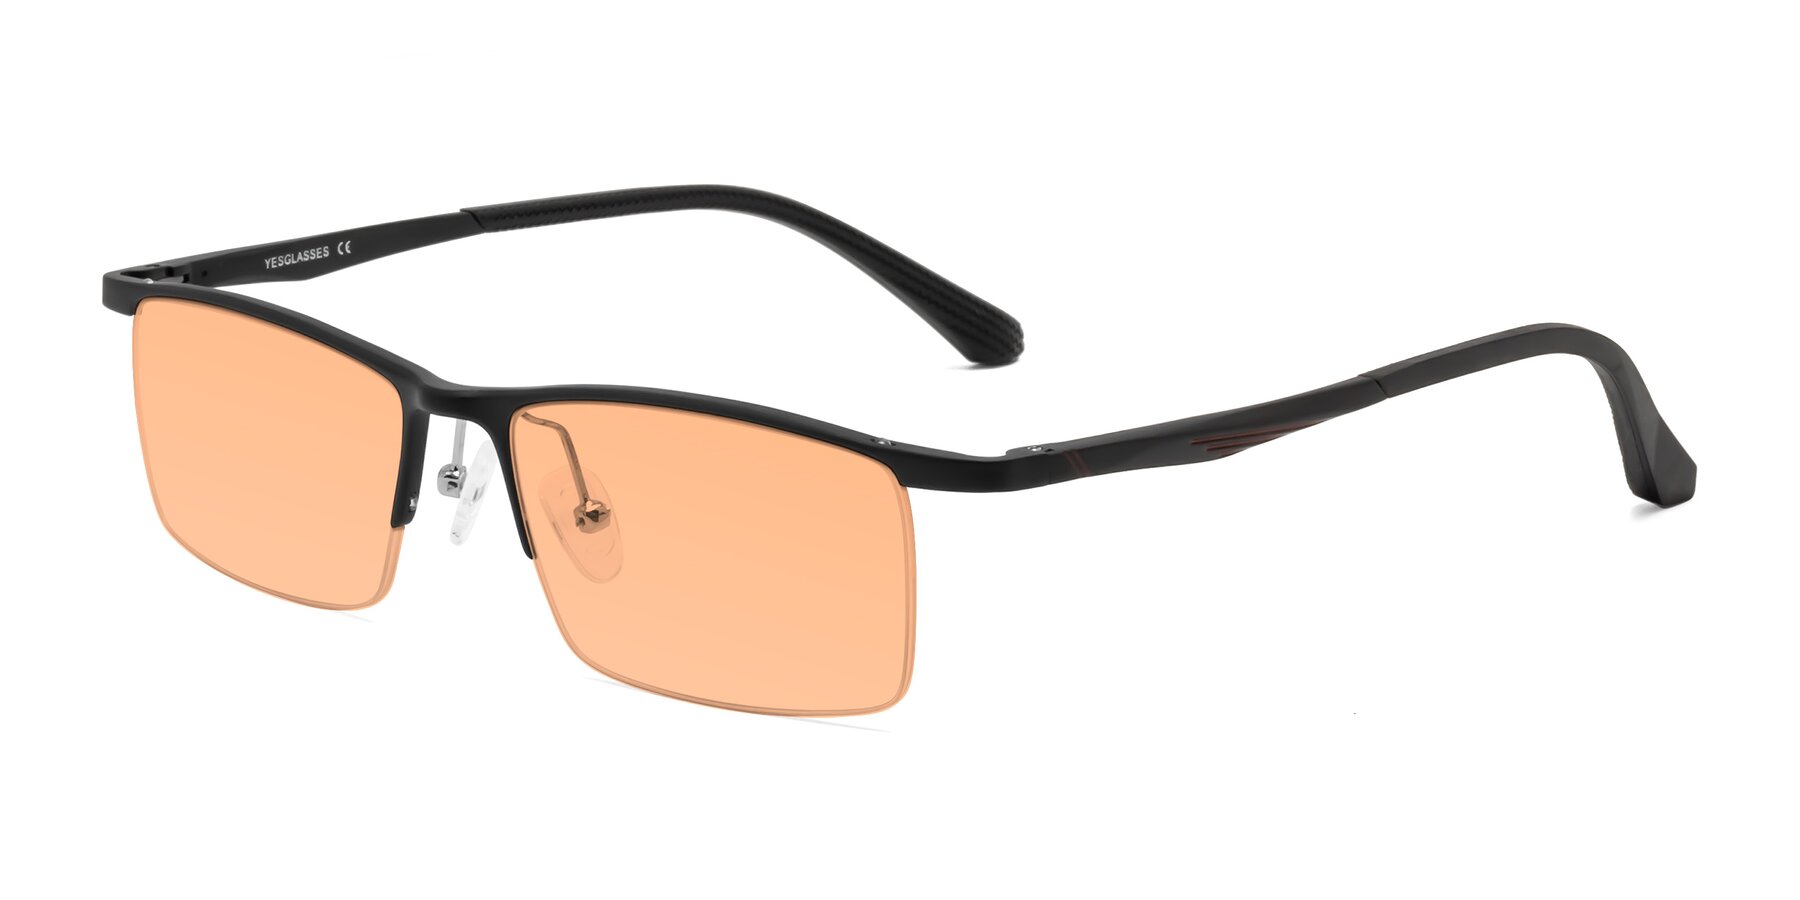 Angle of CX6236 in Black with Light Orange Tinted Lenses